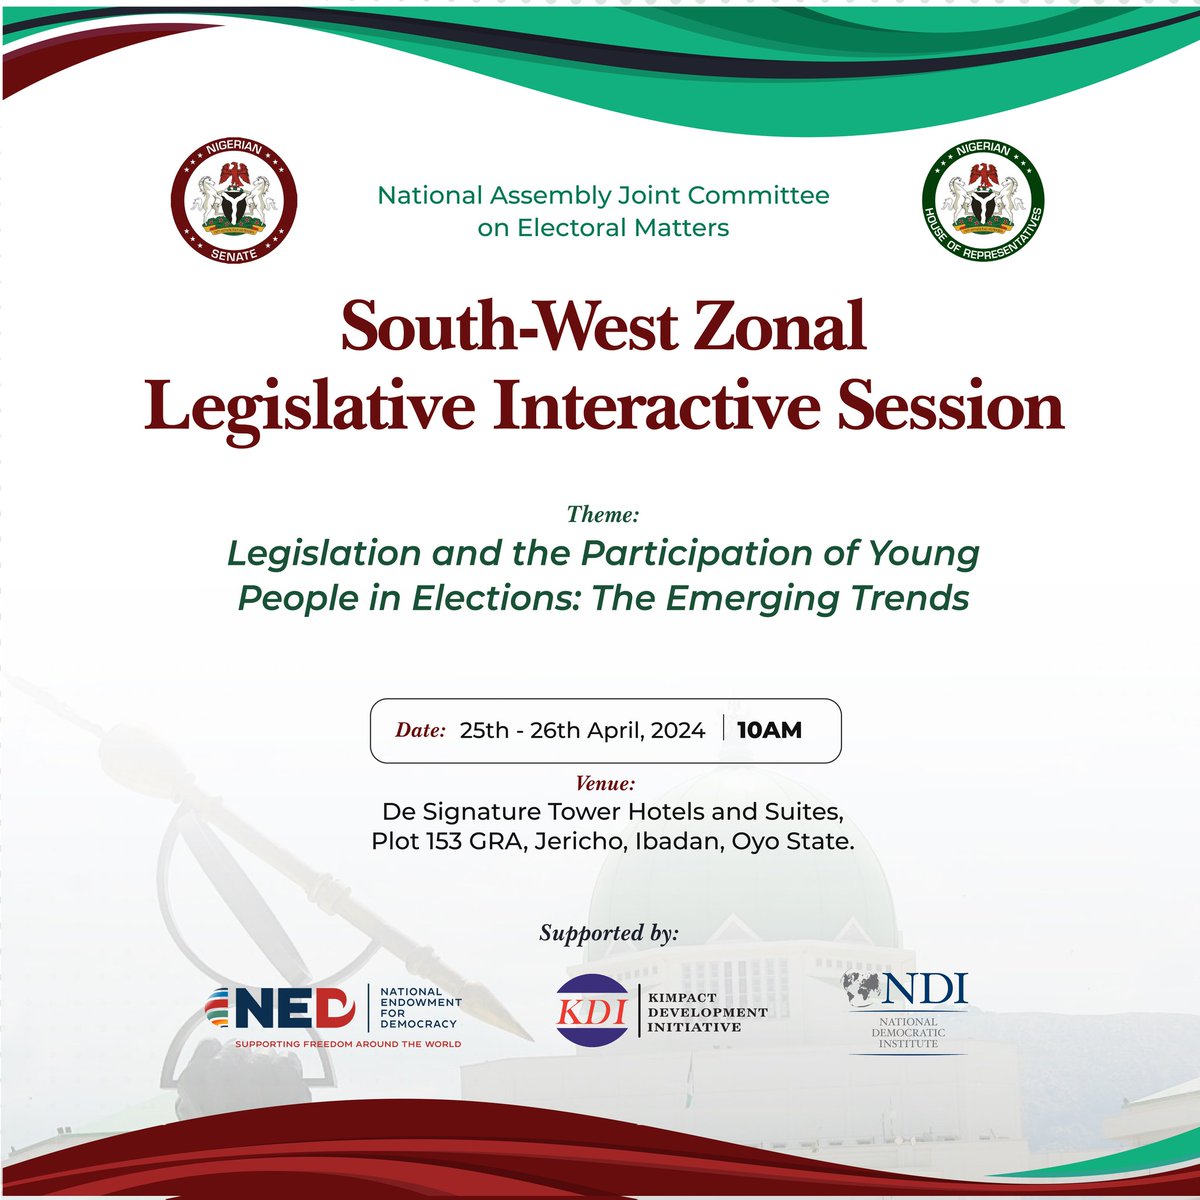 The Joint National Assembly Committee on Electoral Matters, in collaboration with @KDI_ng is scheduled to hold a 2-day South-West Zonal Legislative Interactive Session in Ibadan, Oyo State. This is to provide opportunity for youths to be involved in electoral reform process.